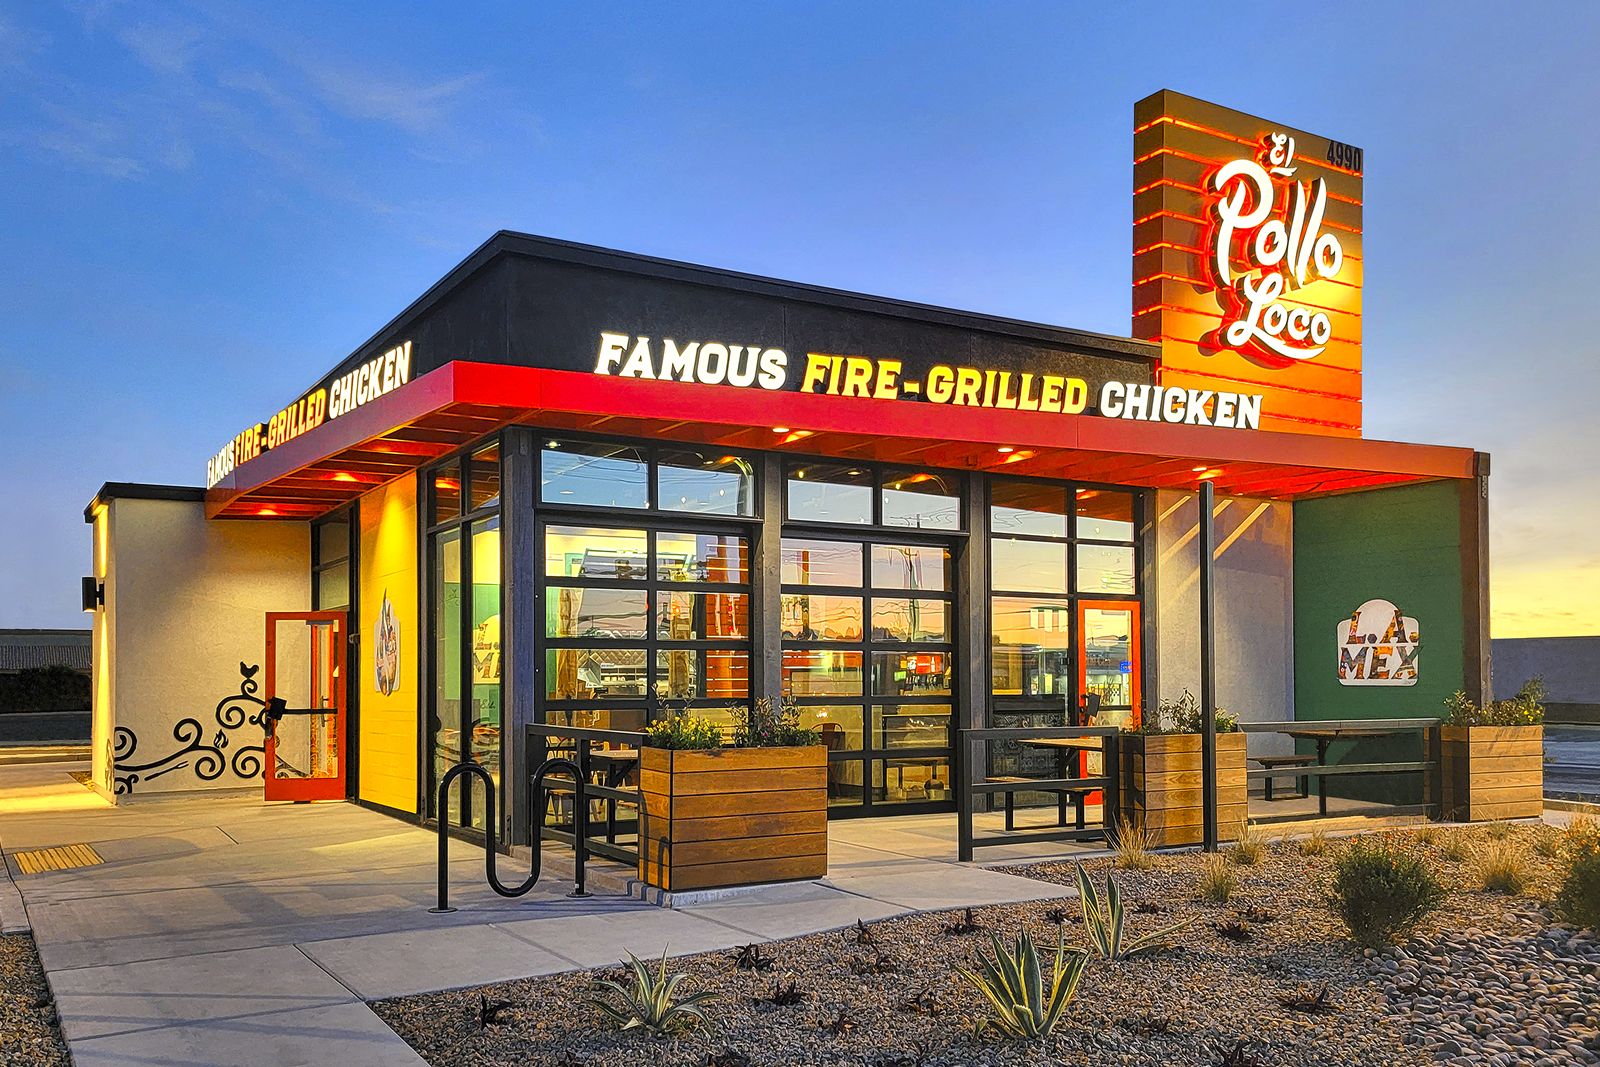 El Pollo Loco menu prices featuring 100 items ranging from $1.29 to $30.99